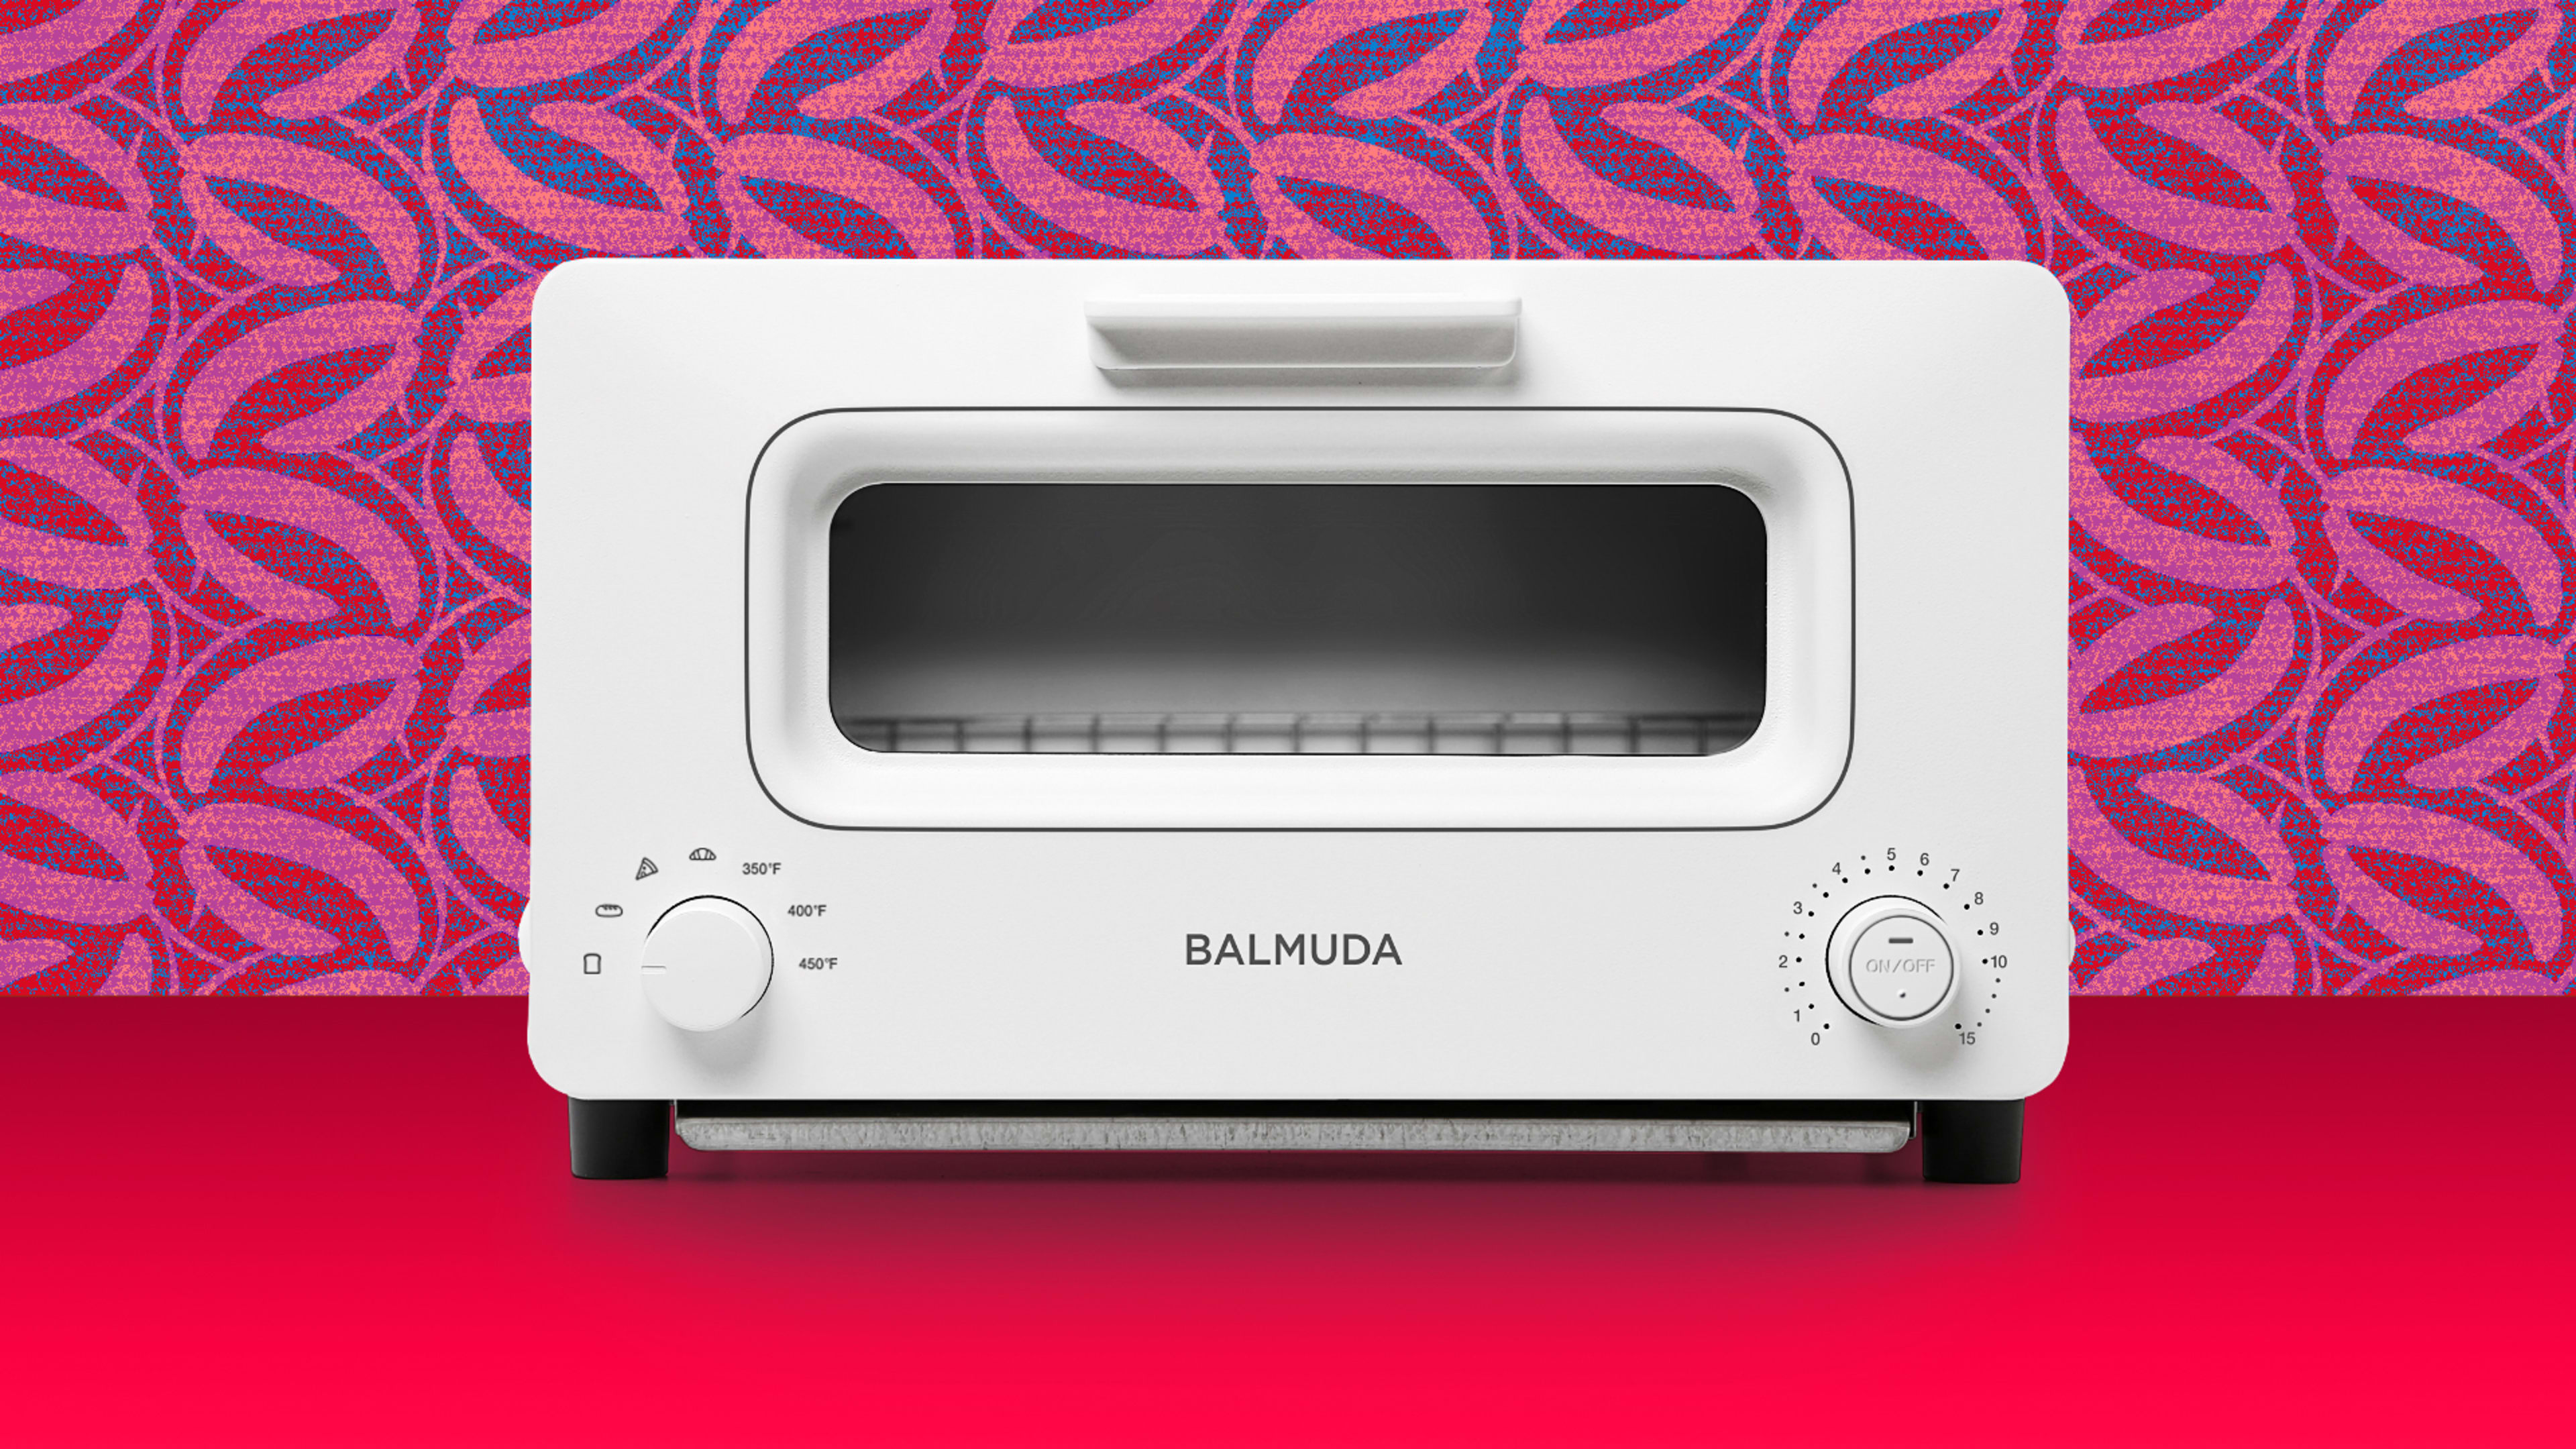 Does steaming your toast really make it more delicious? I tried Balmuda’s high-tech toaster oven to find out